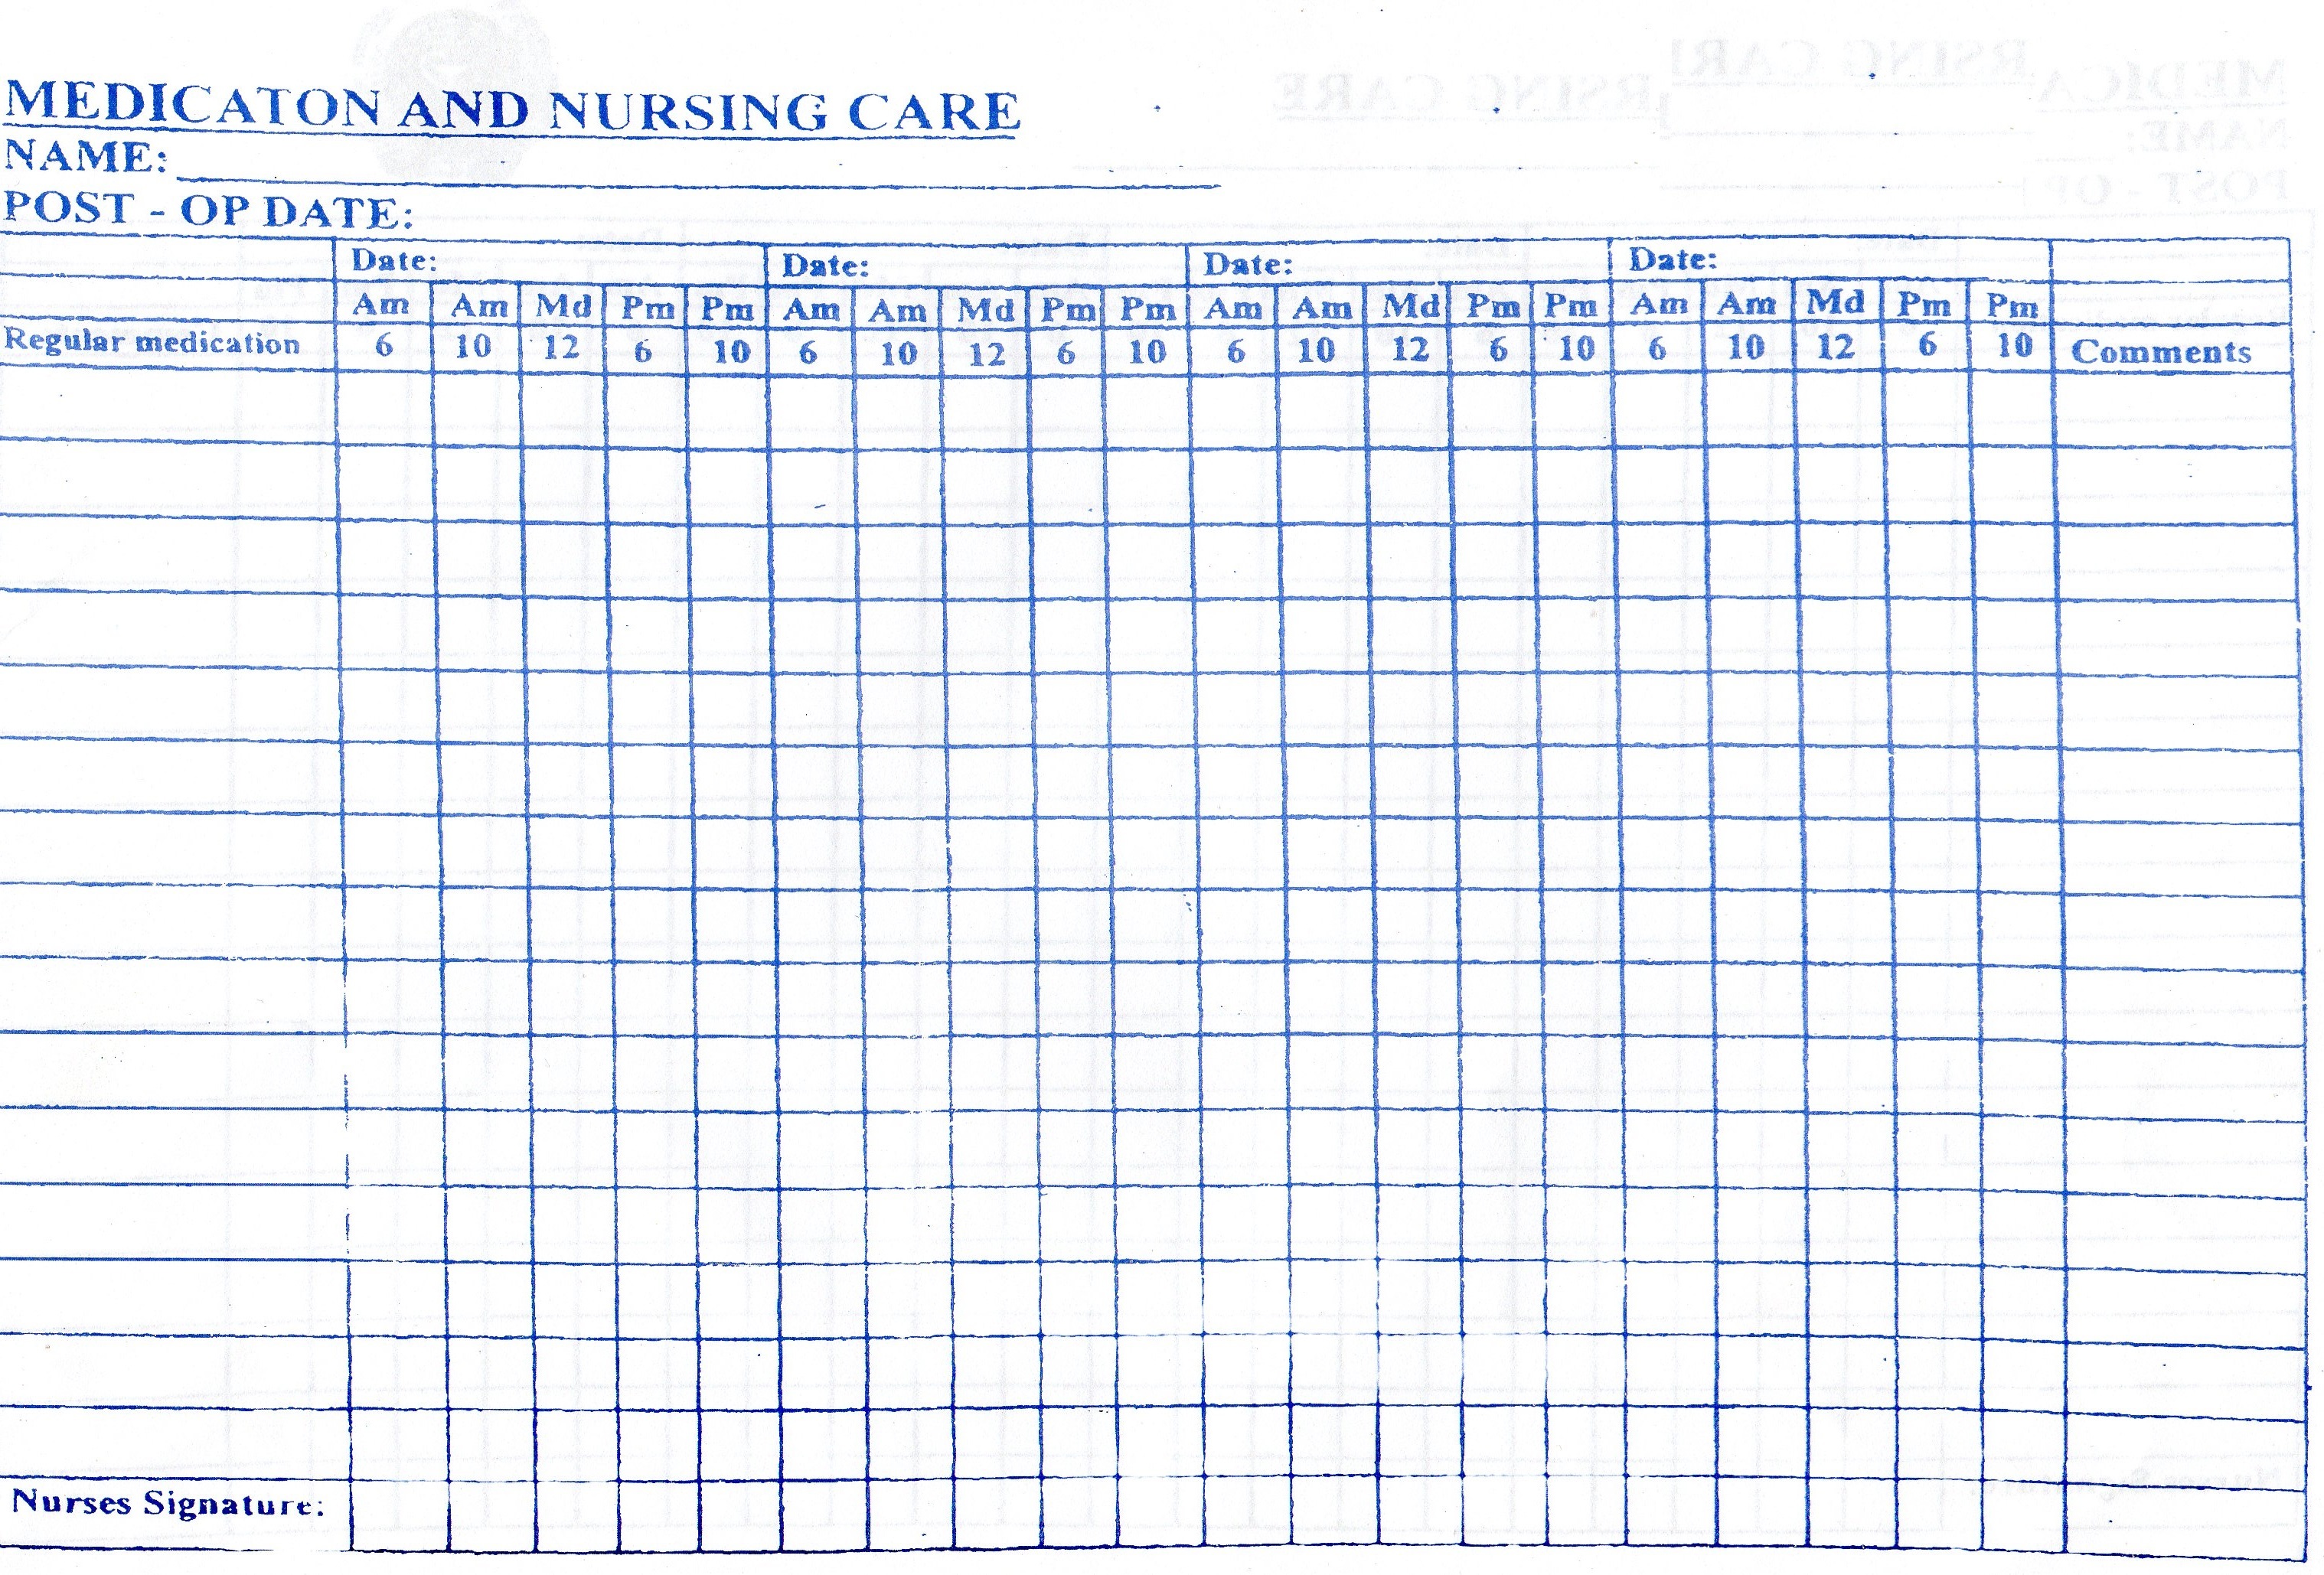 Input And Output Chart In Nursing